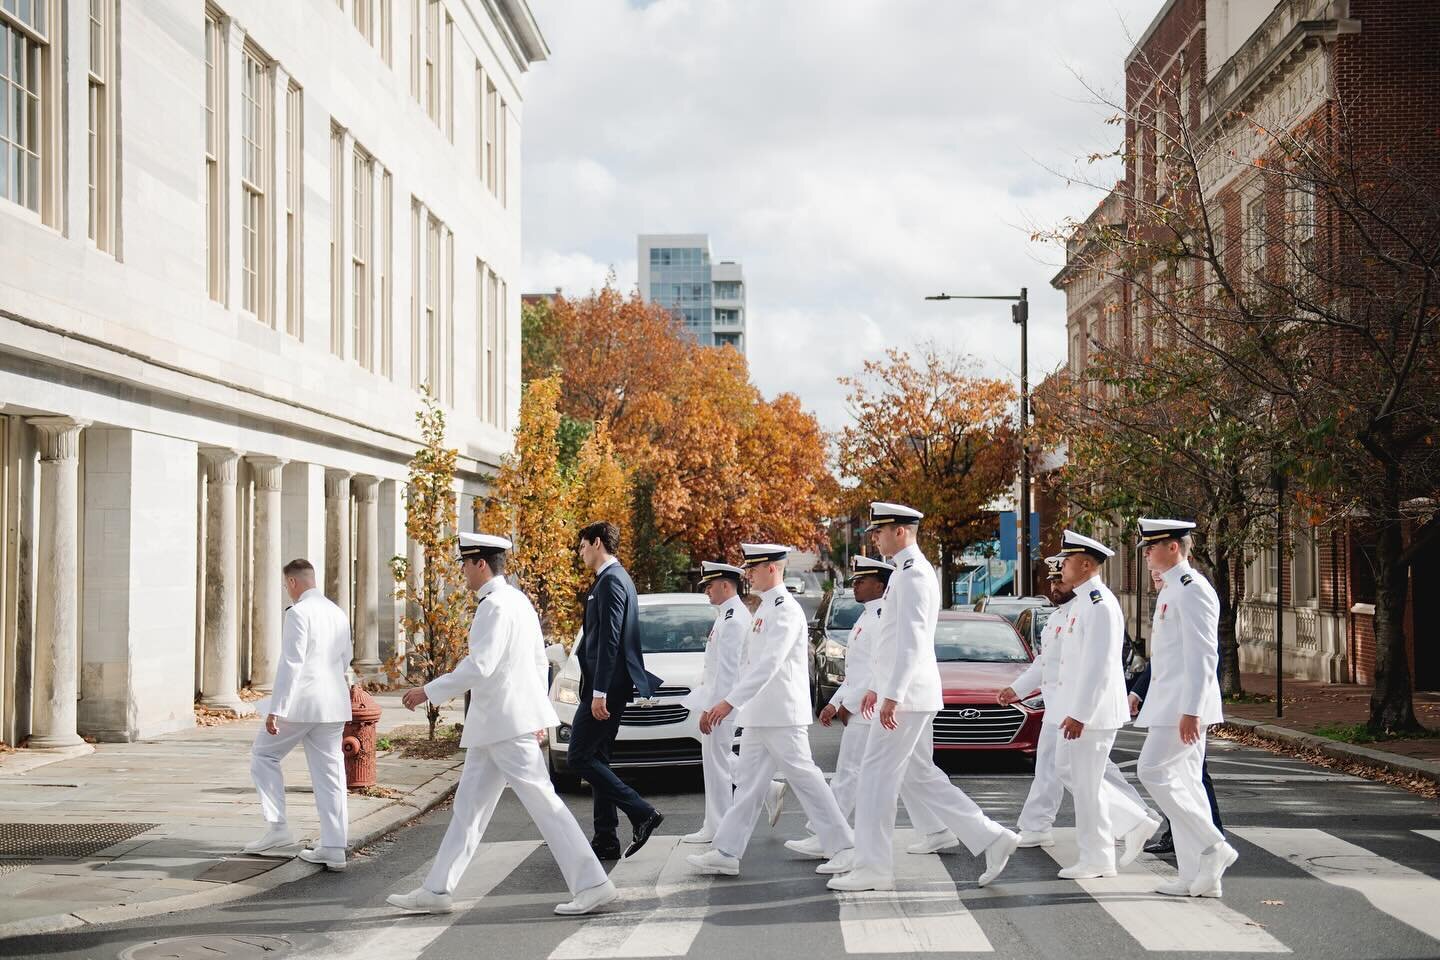 A Philly-style Abbey Road.

Shot for @asya_photography_philly